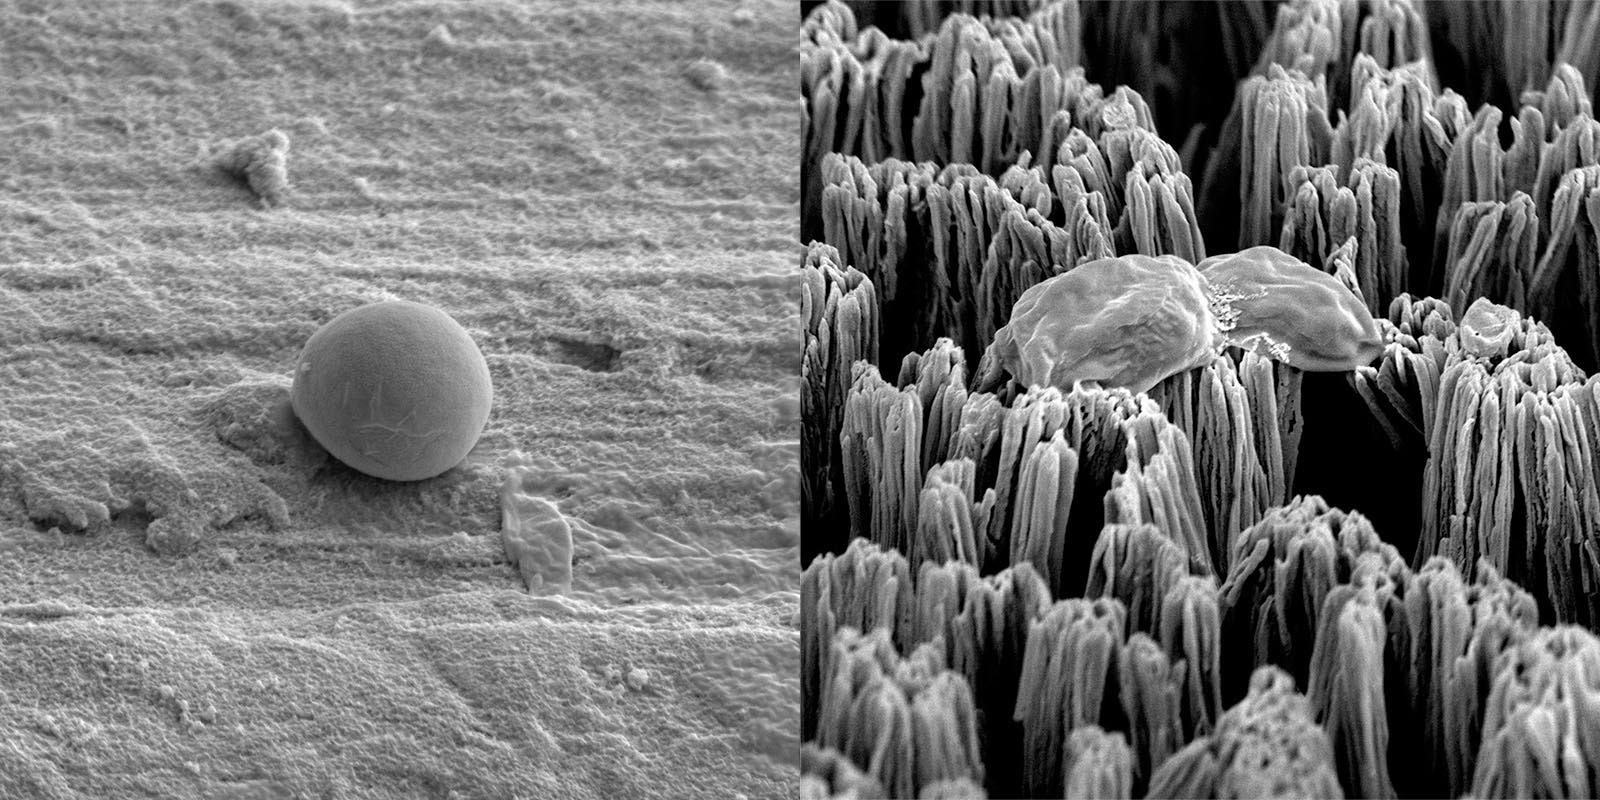 An intact Candida cell on polished titanium surface (left), and a ruptured Candida cell on the micro-spiked titanium surface (right).